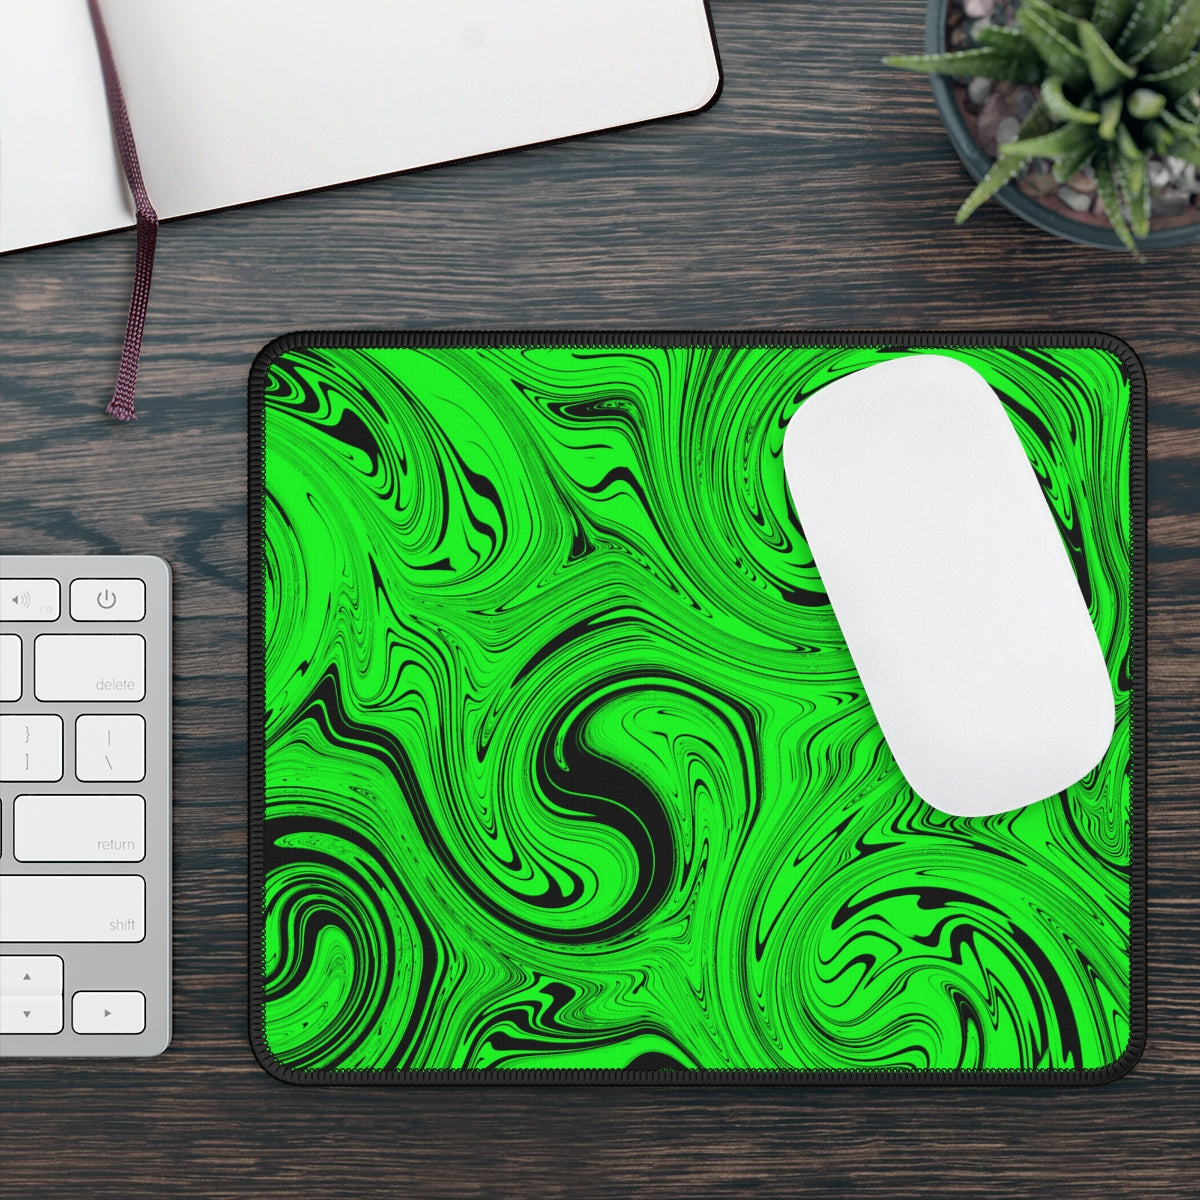 Green & Black Swirl Gaming Mouse Pad - Desk Cookies